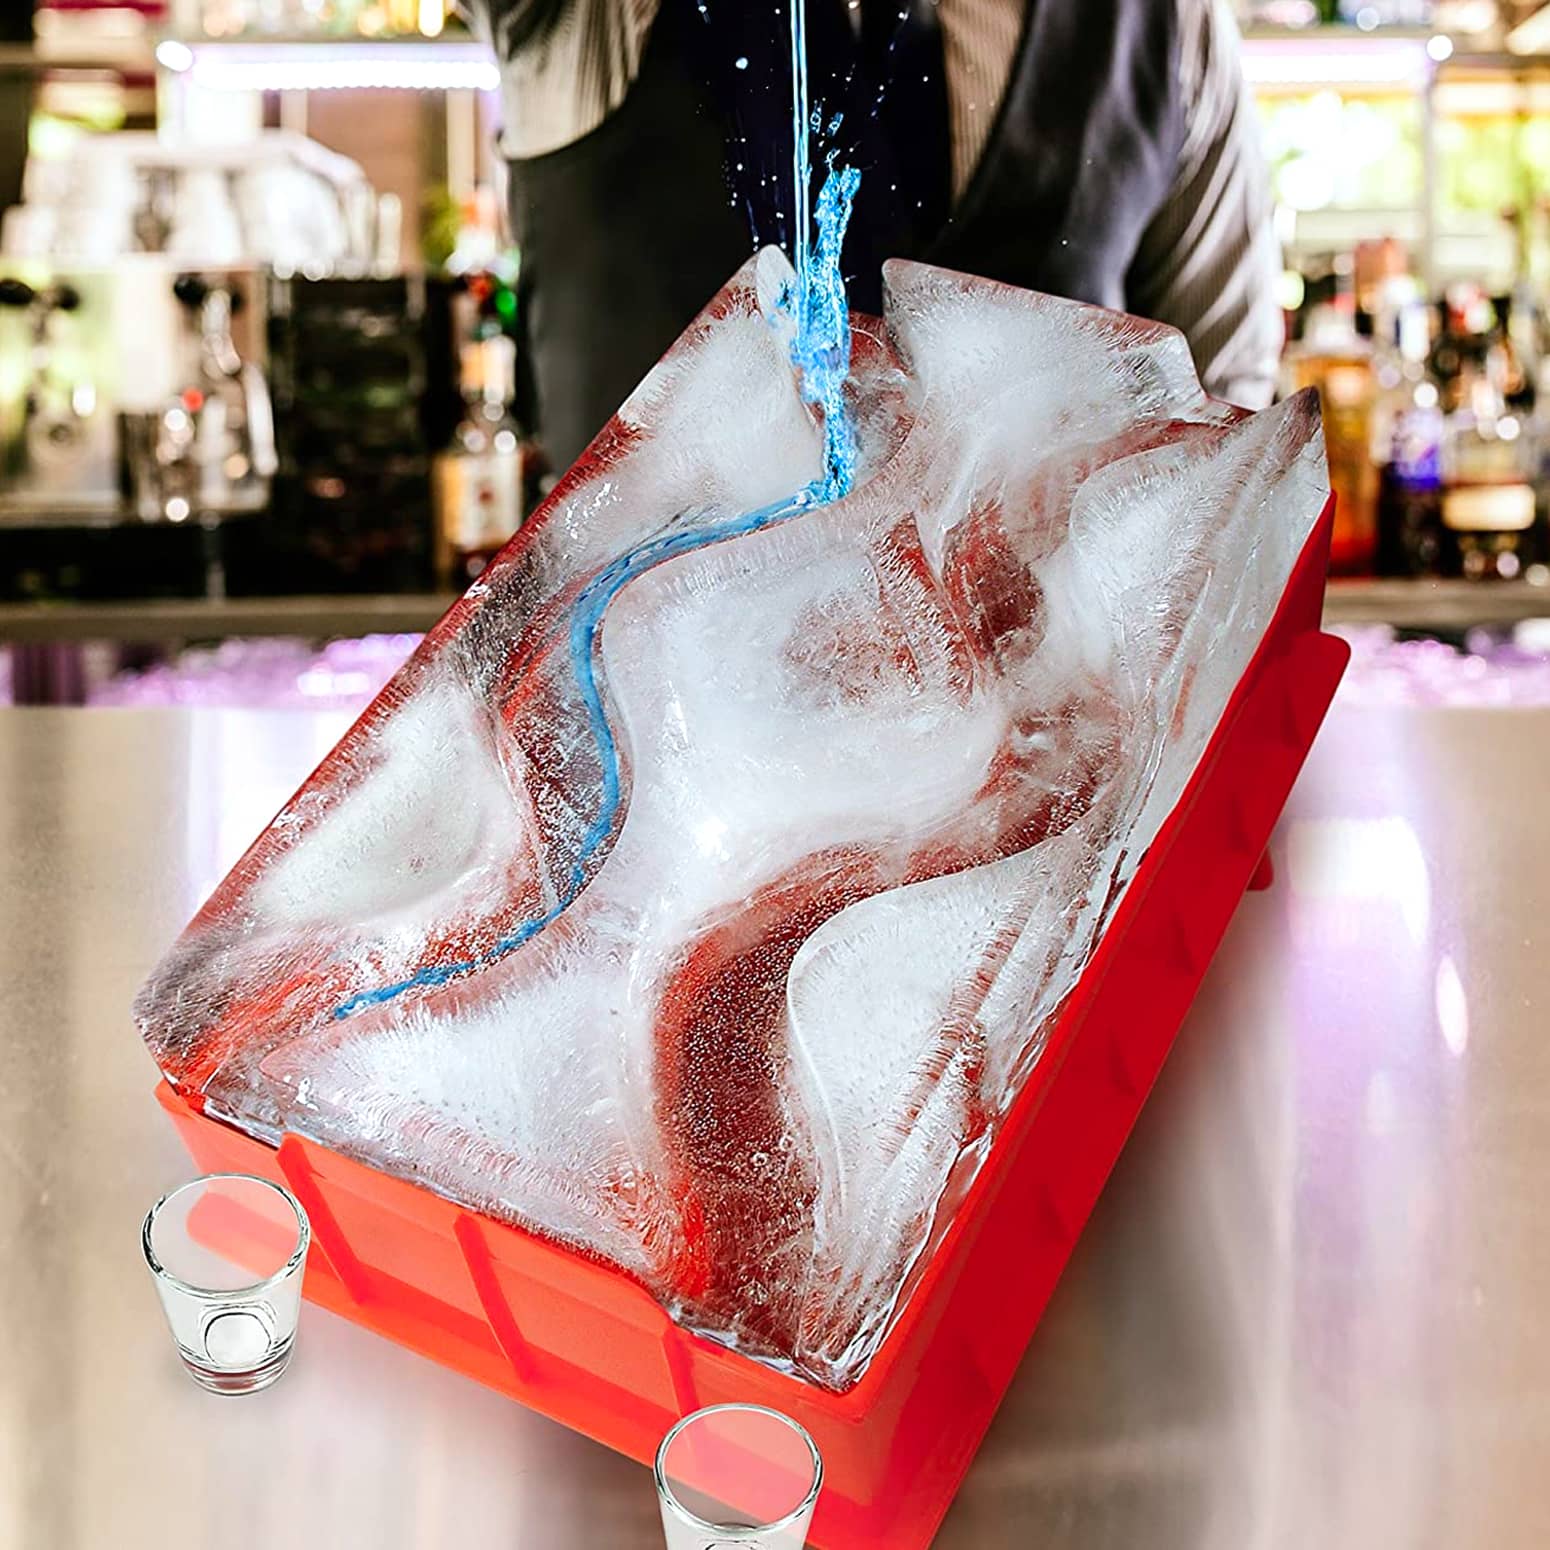 Party Ice Luge - Race Shots Down the Icy Slopes!